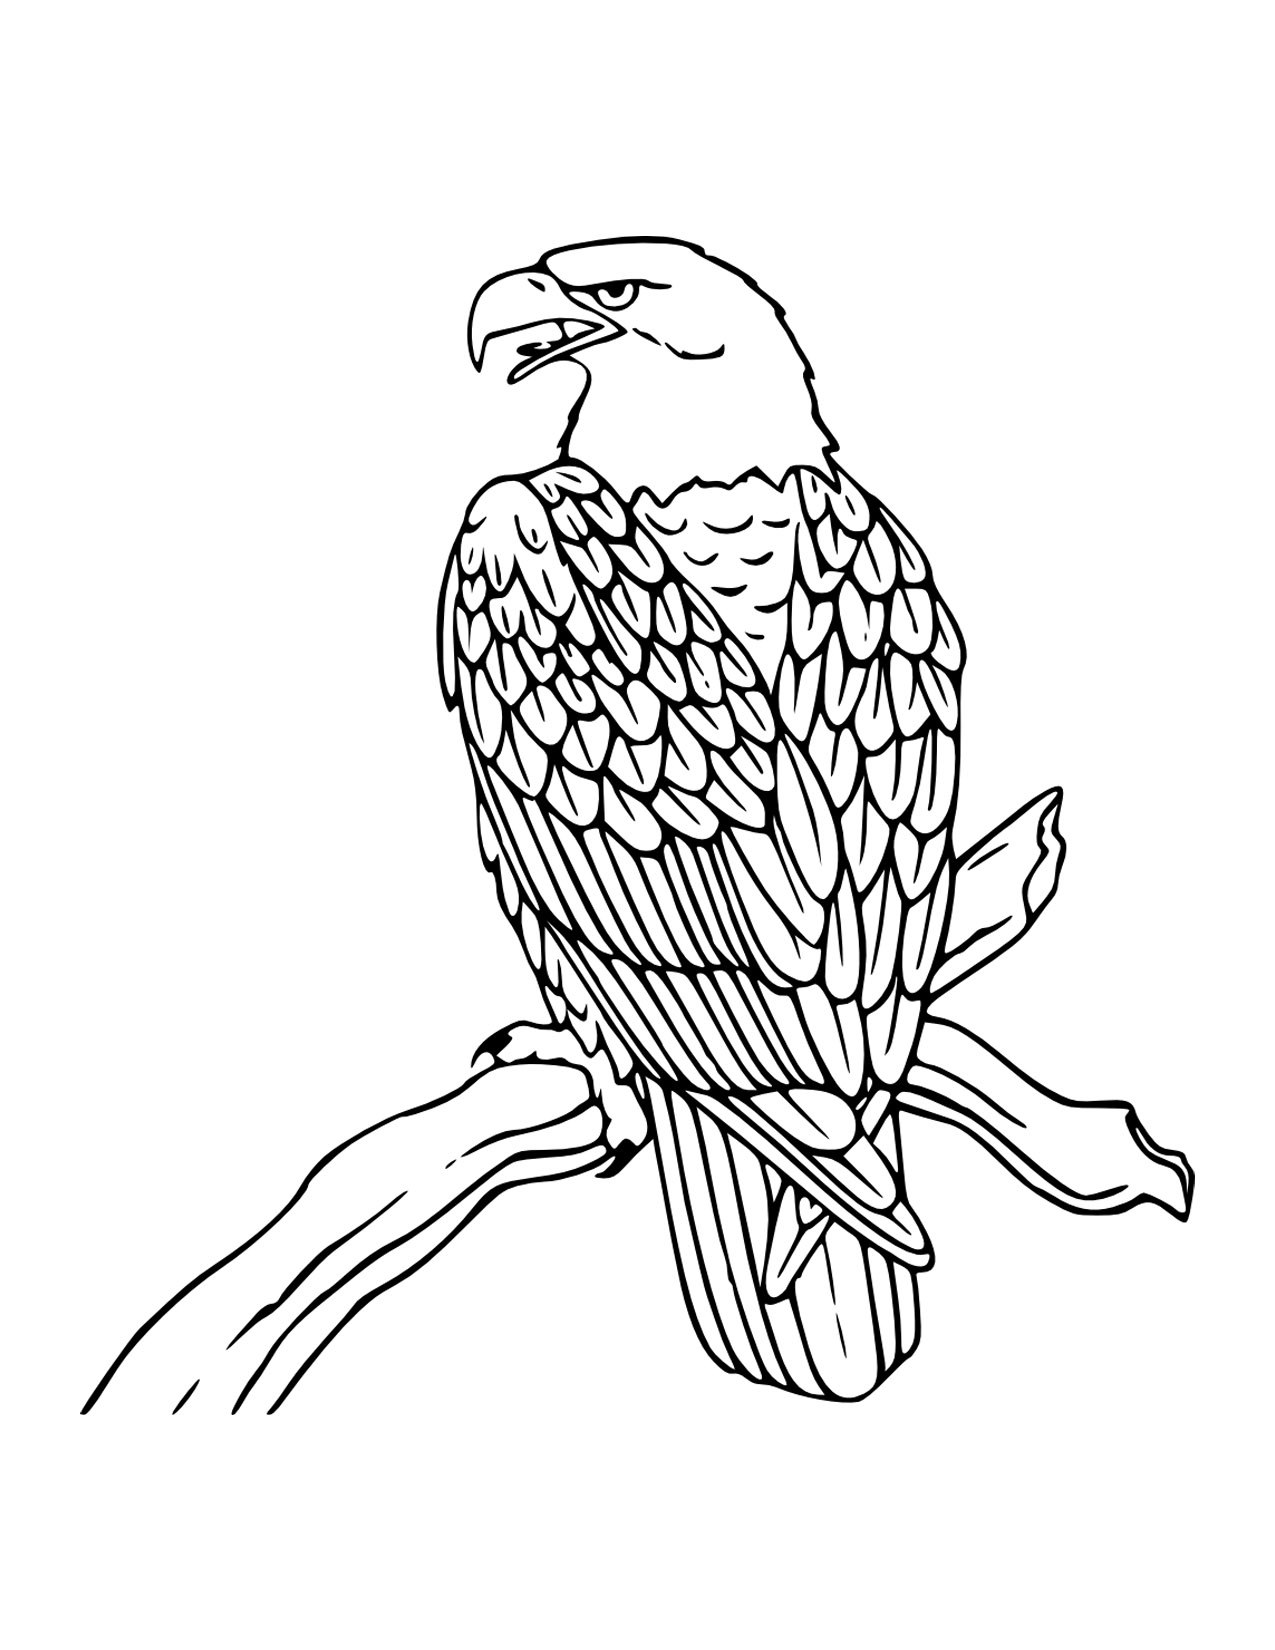 20-eagle-coloring-pages-for-adults